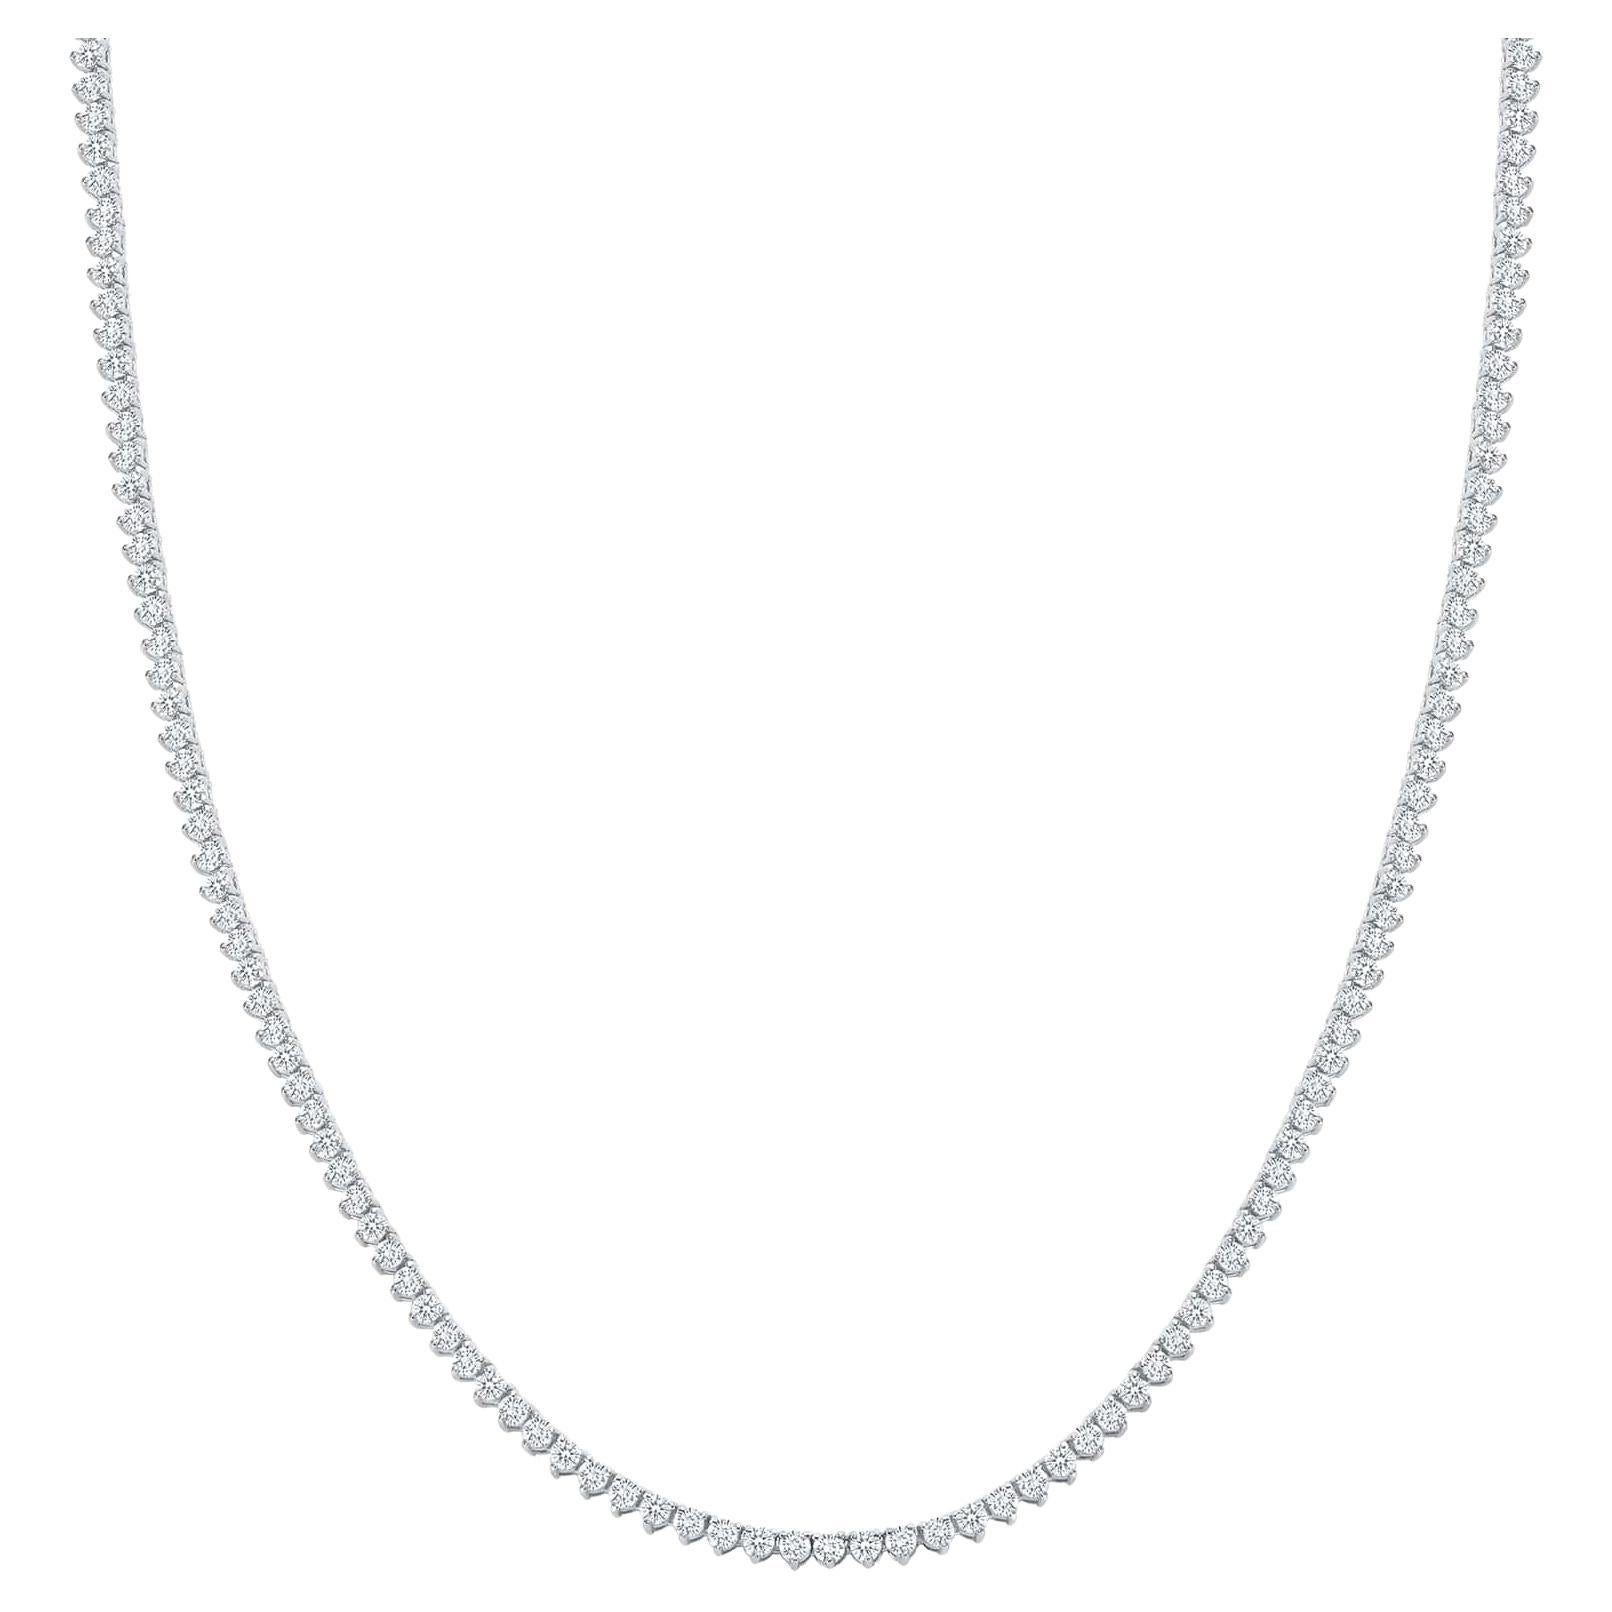 This diamond tennis necklace features beautifully cut round diamonds set gorgeously in 14k gold

Necklace Information
Metal : 14k Gold
Diamond Cut : Round Natural Conflict Free Diamond 
Total Diamond Carats : 5ttcw
Diamond Clarity : VS
Diamond Color